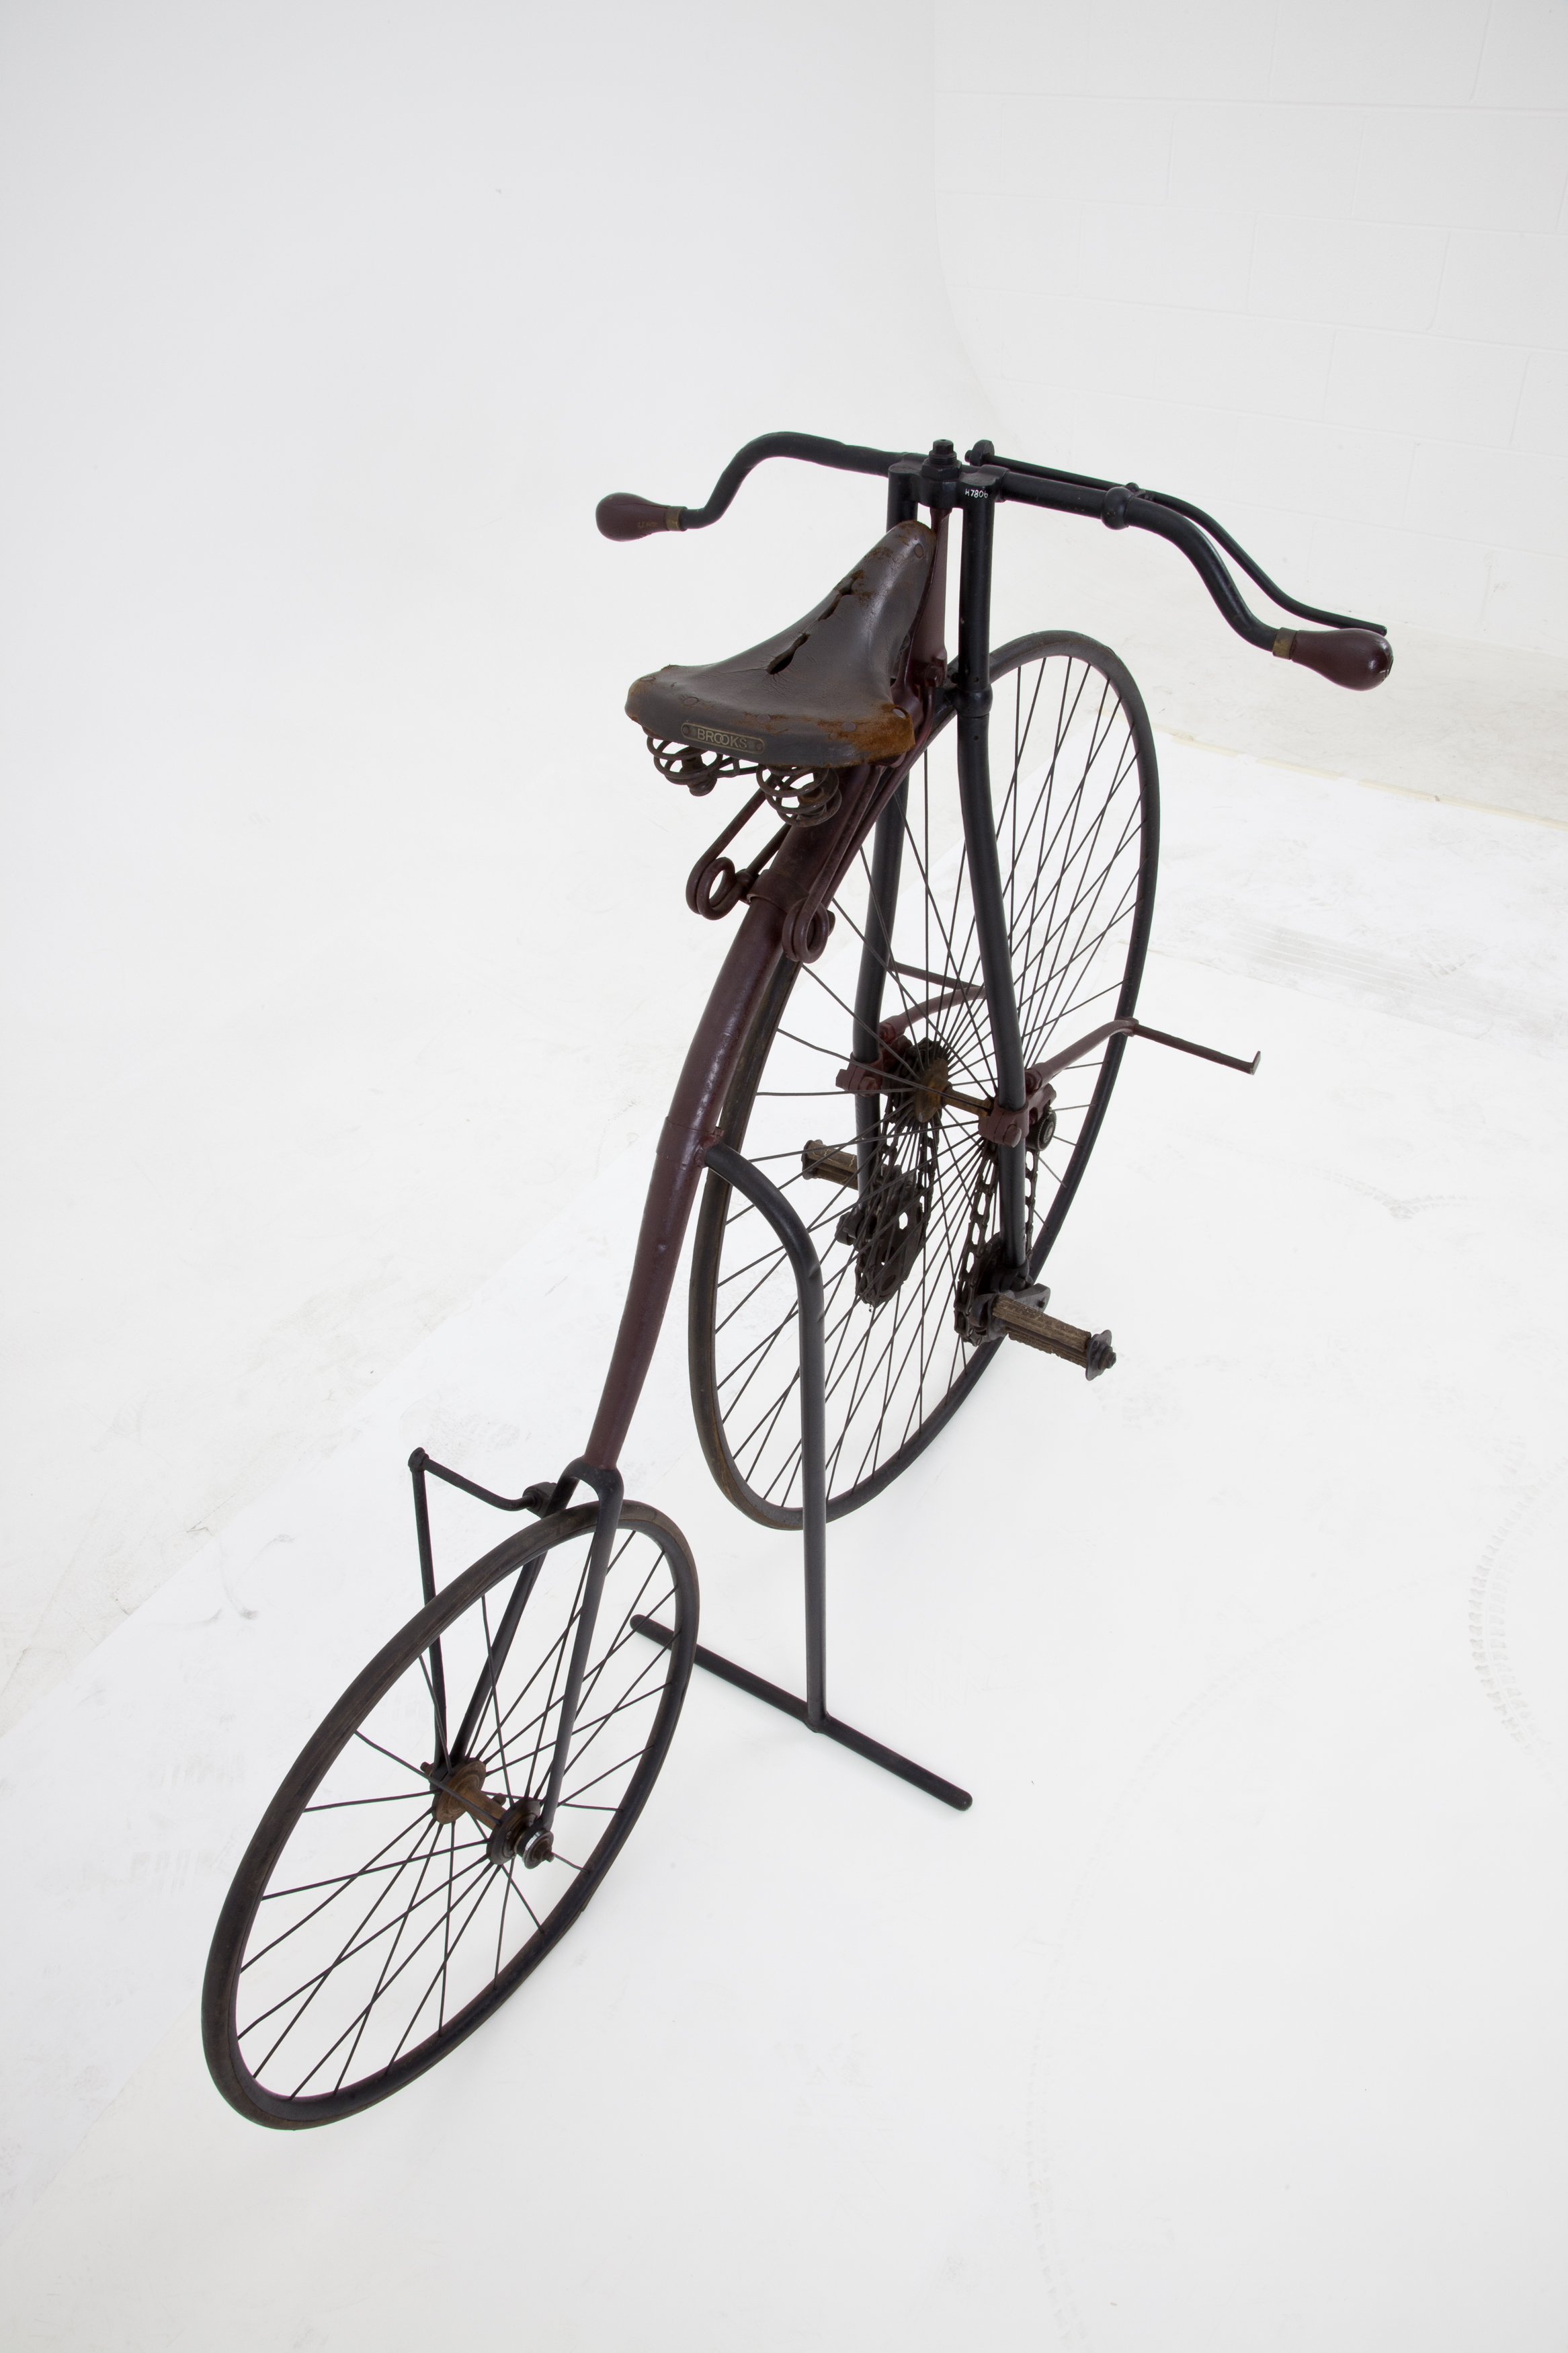 'Moorgate Roadster' dwarf safety bicycle